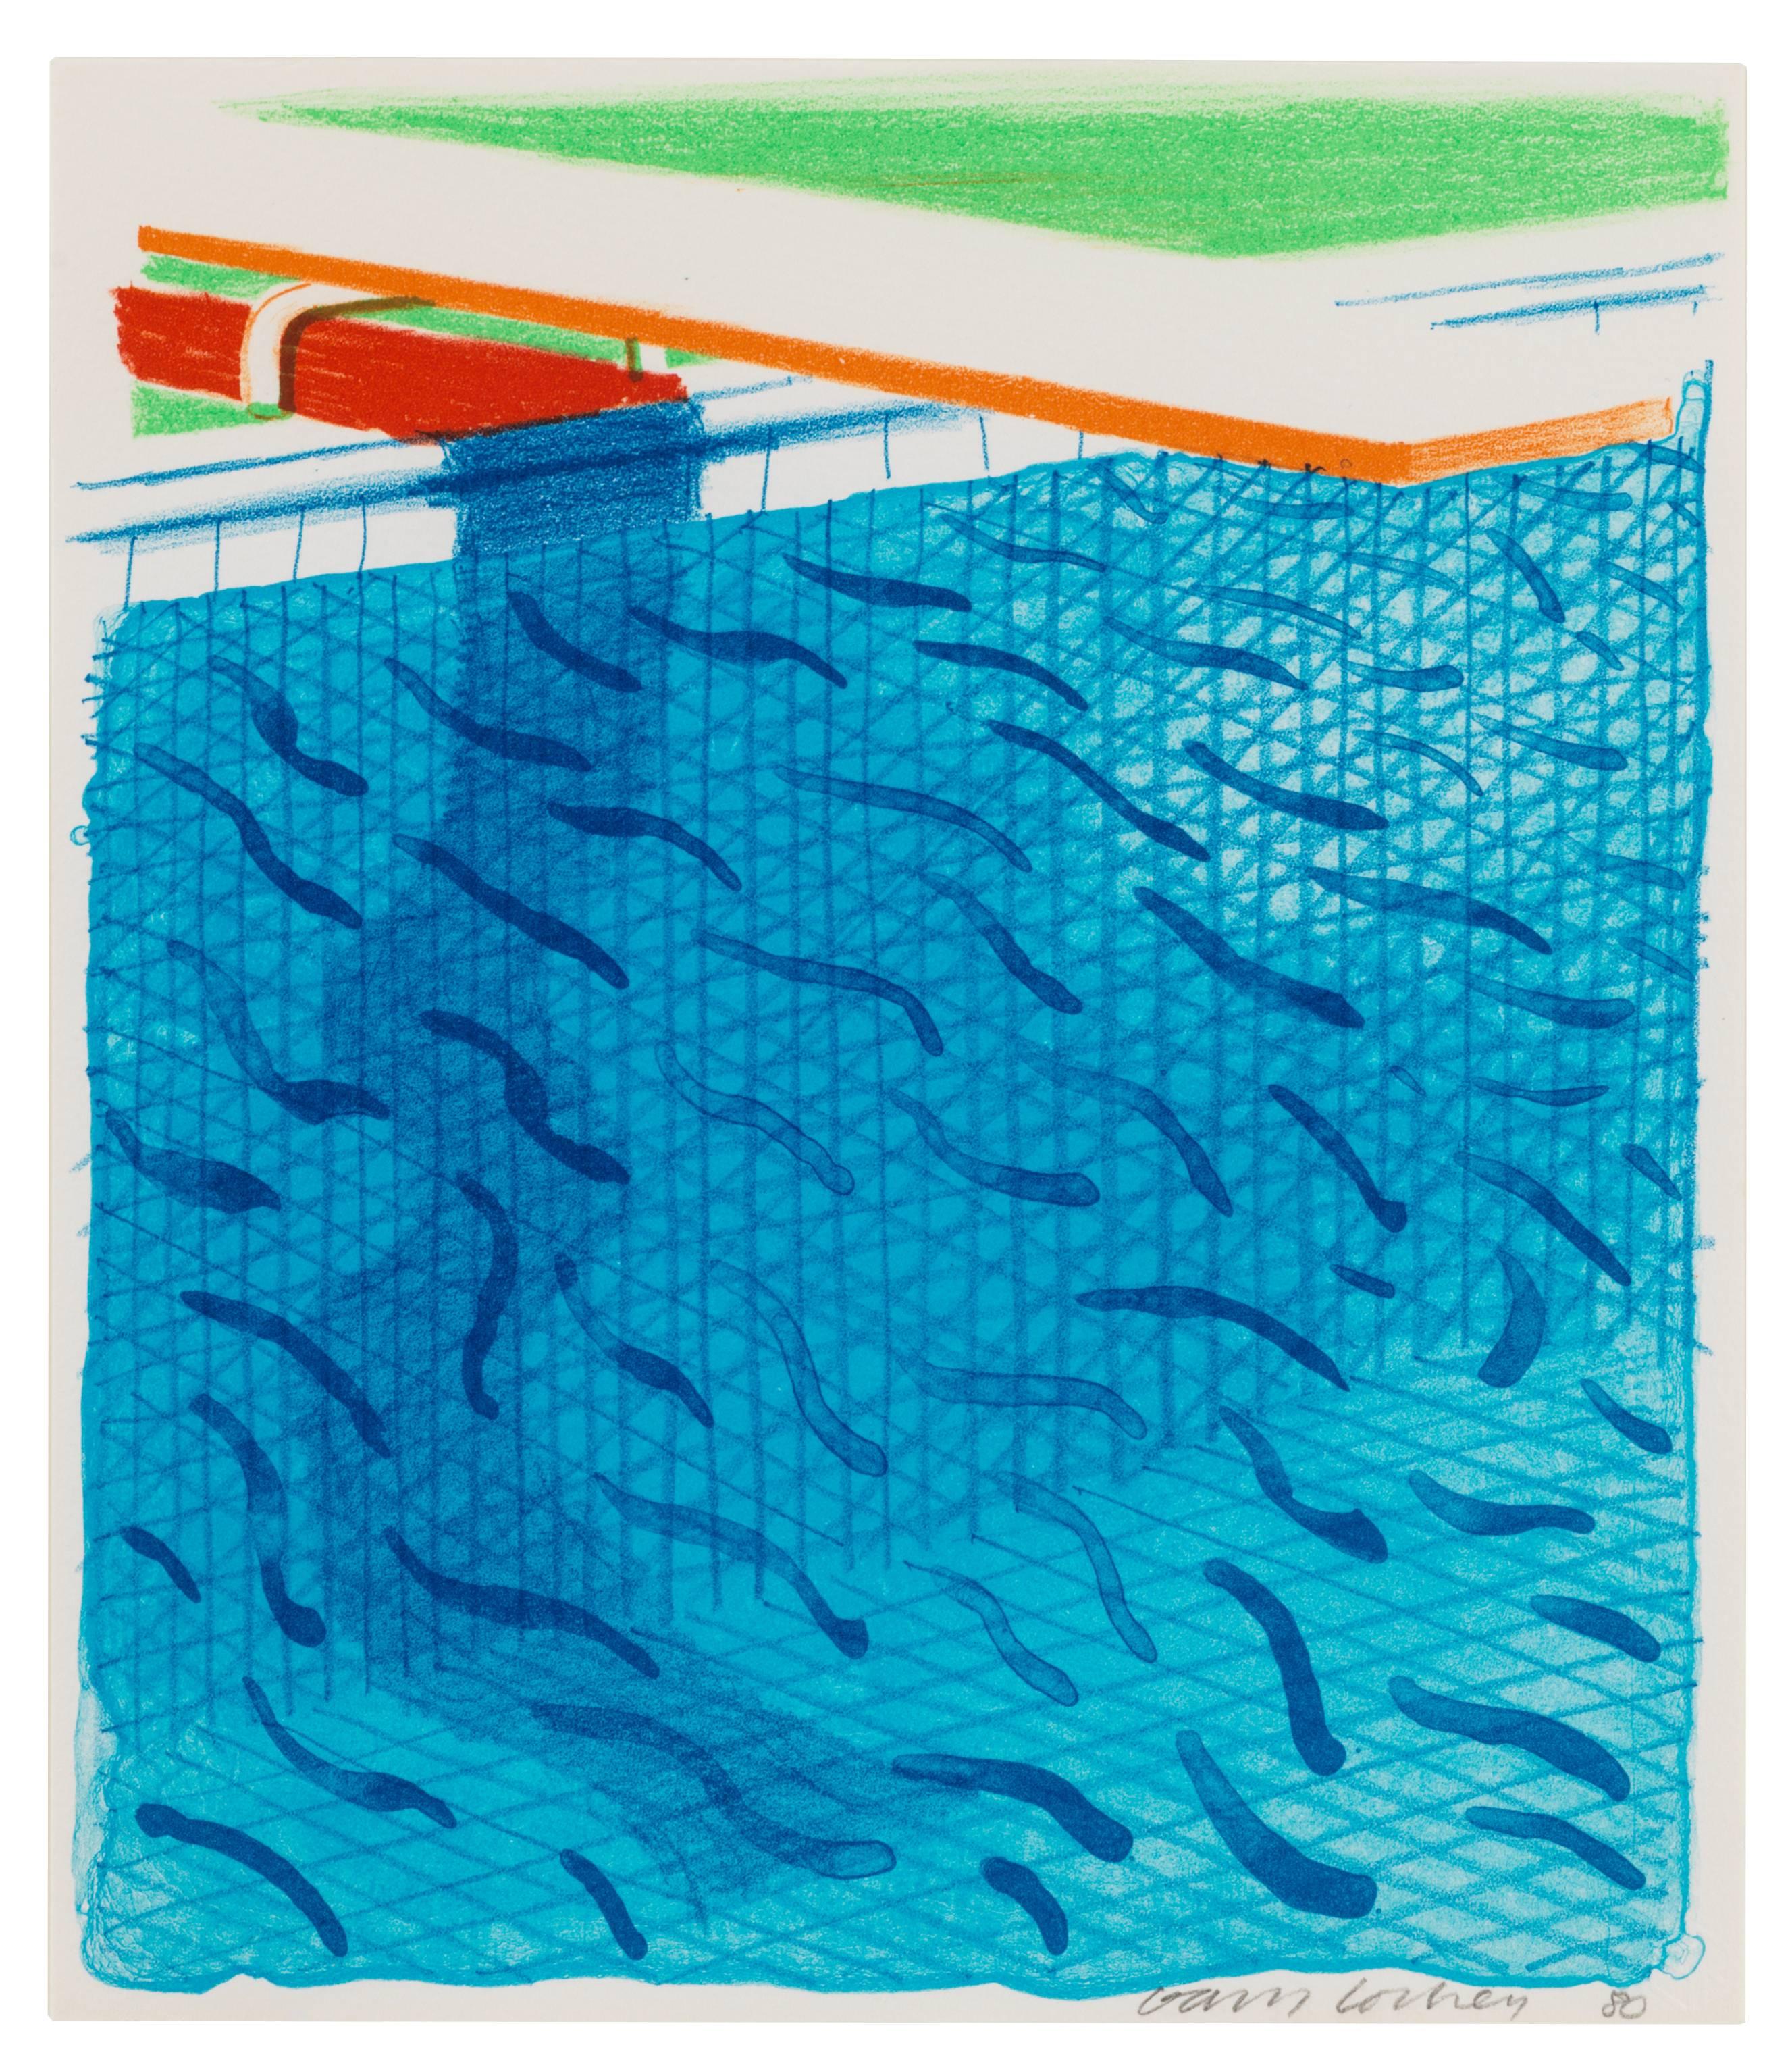 David Hockney Landscape Print - Pool Made with Paper and Blue Ink for Book of Paper Pools